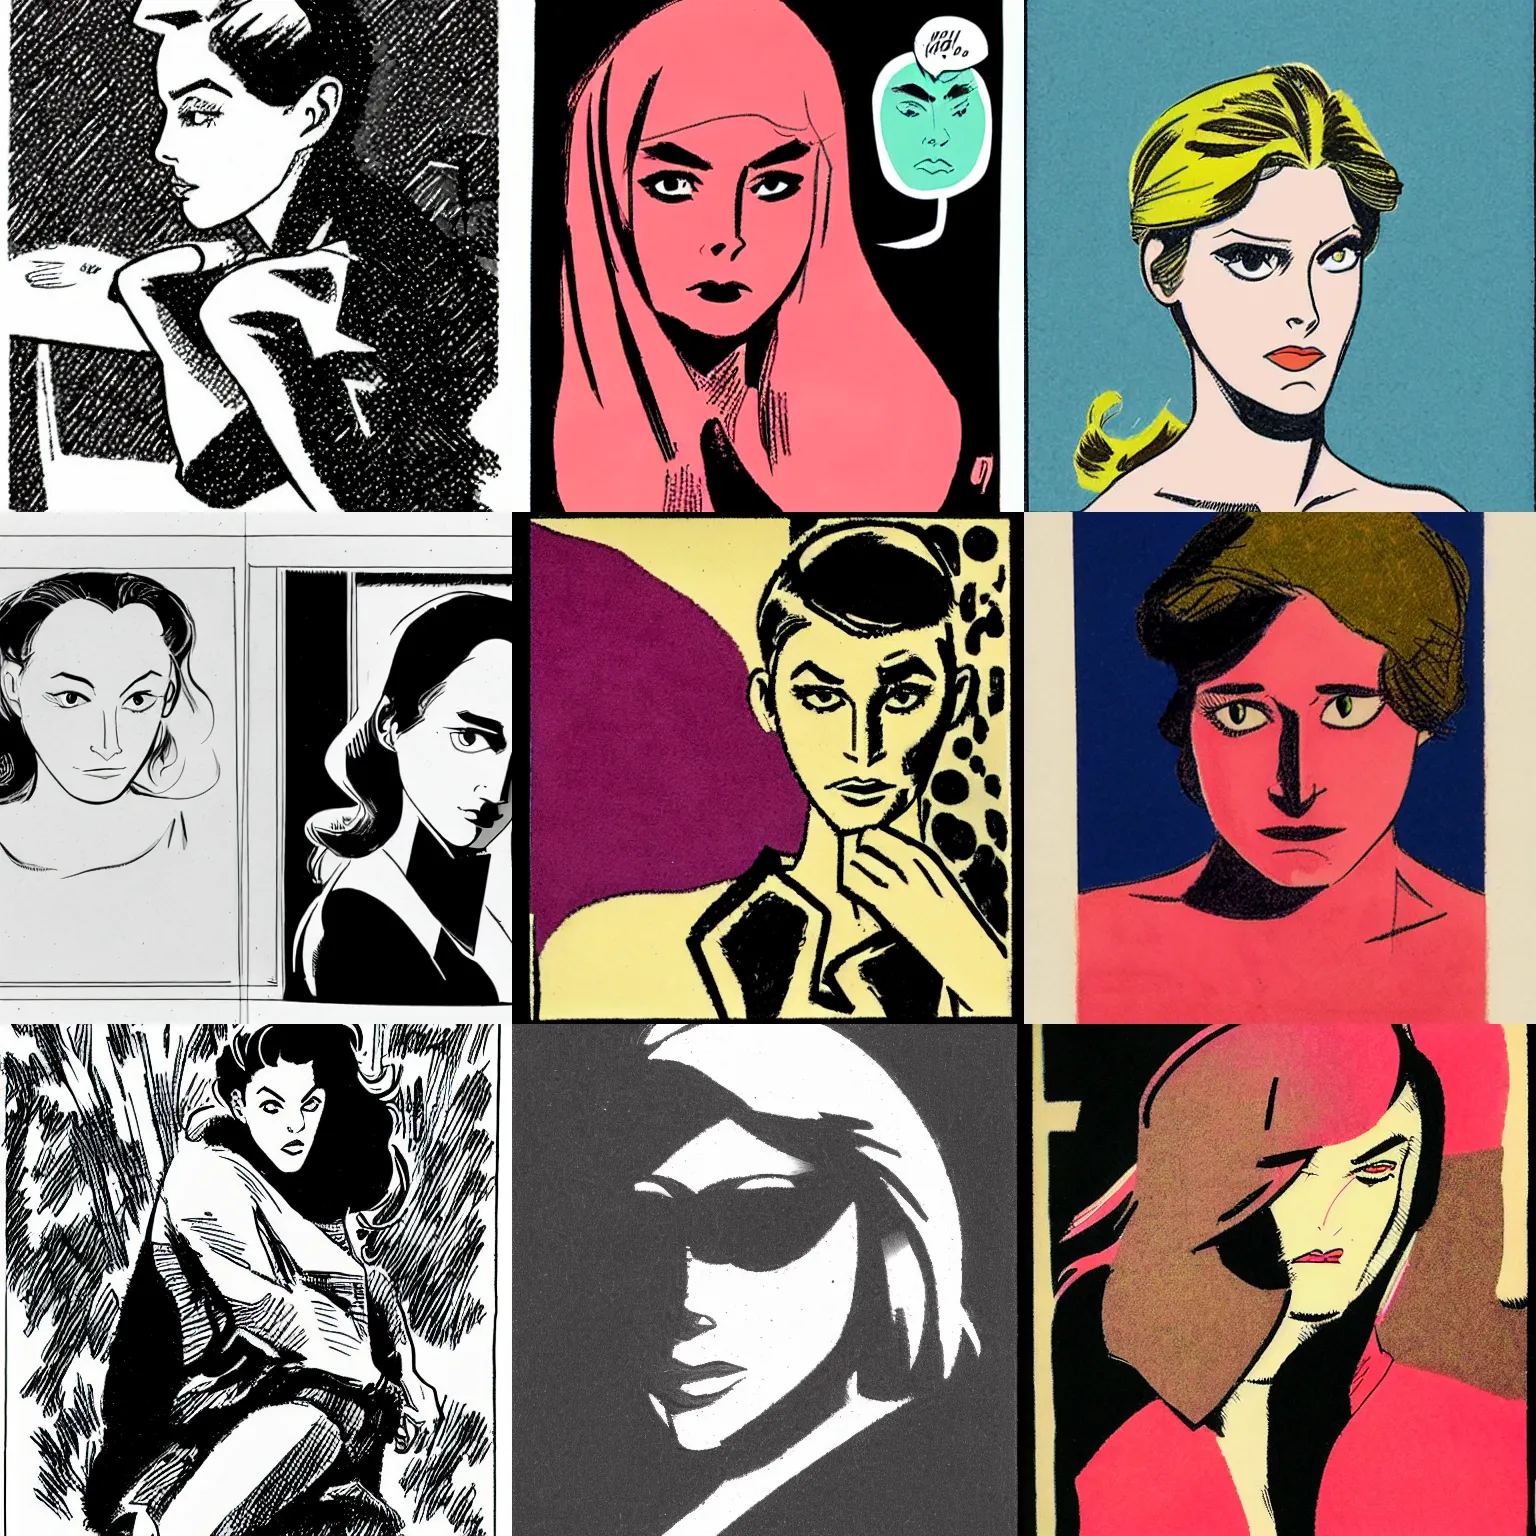 Prompt: a female character drawn by David Mazzucchelli, CMYK portrait